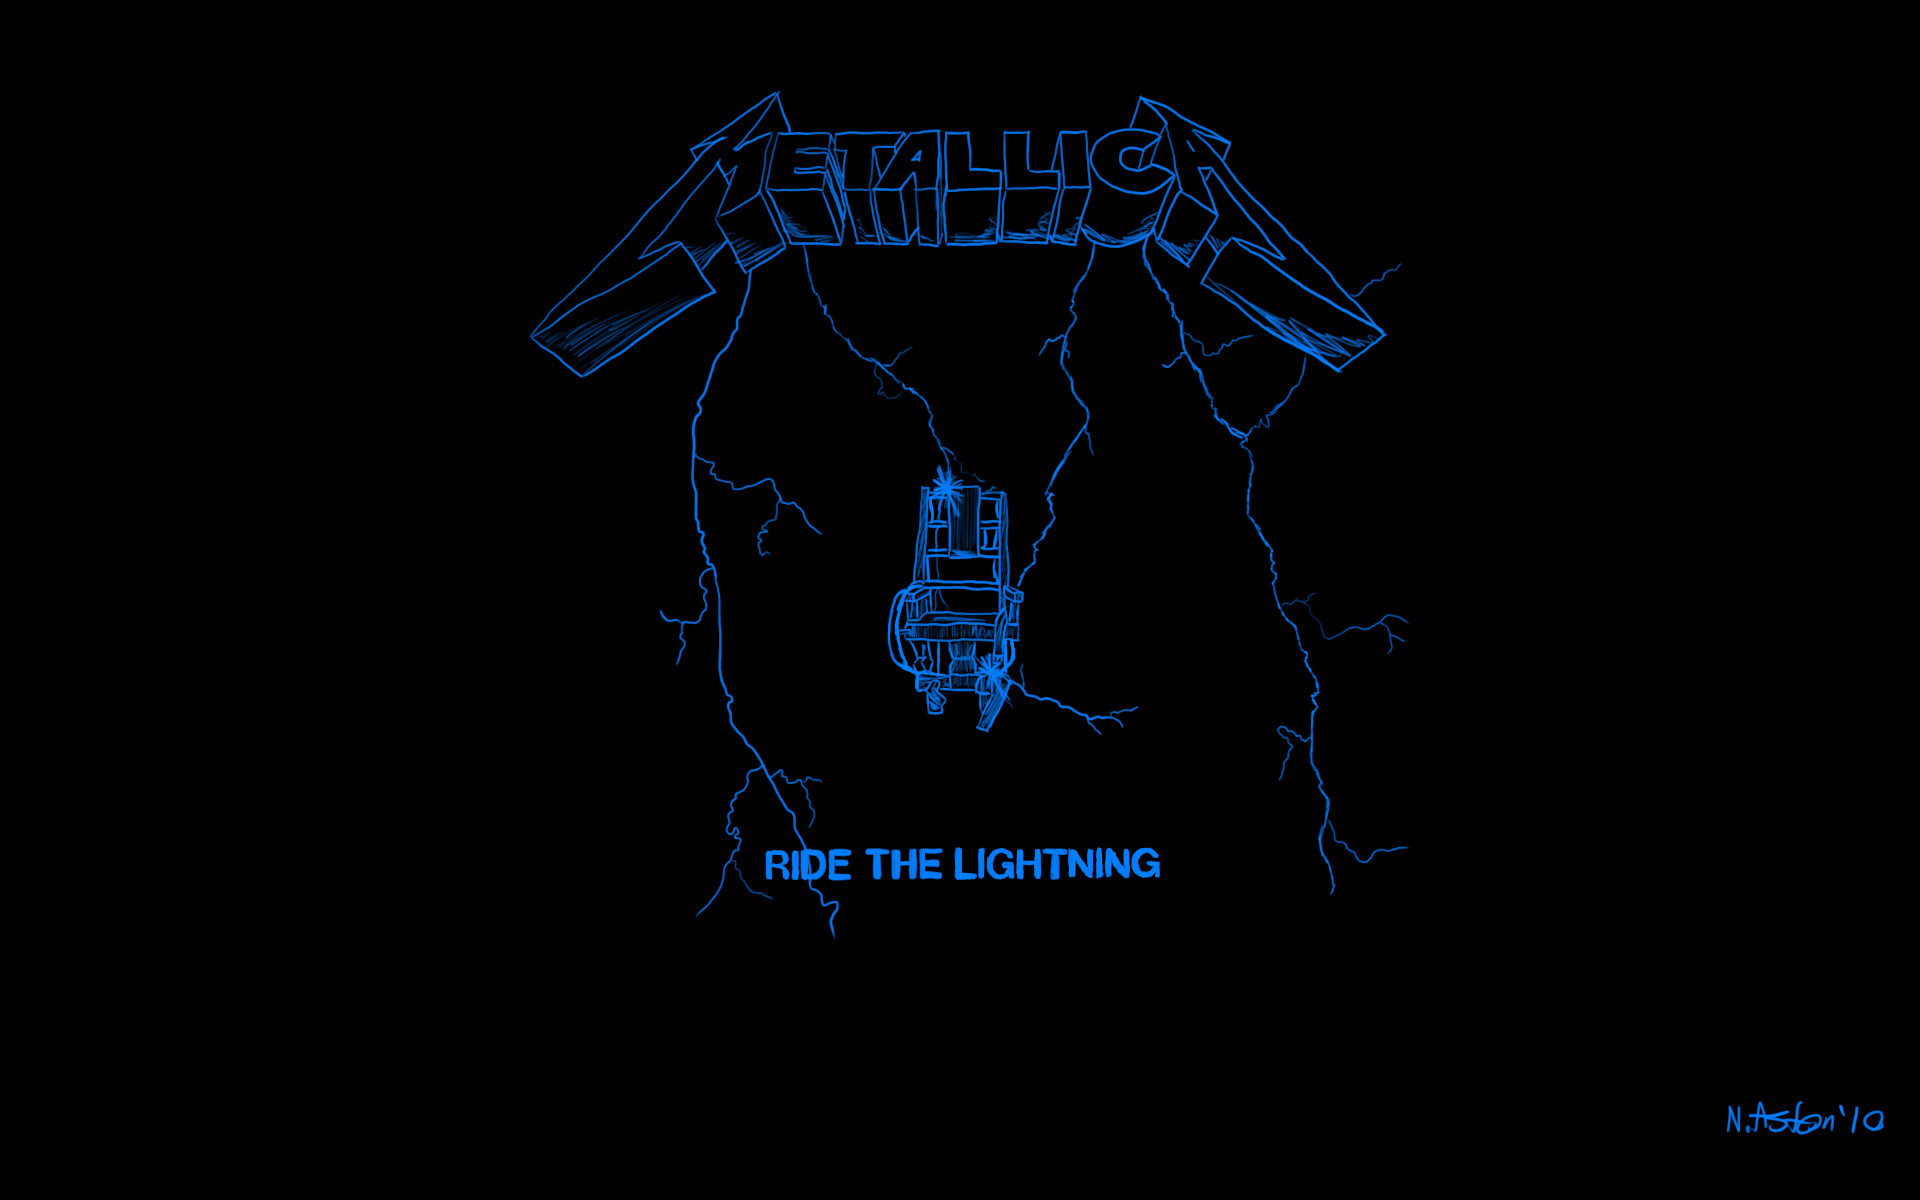 1920x1200 Metallica Ride The Lightning Wallpapers For Iphone For Desktop Wallpaper  1920 x 1200 px 692.31 KB